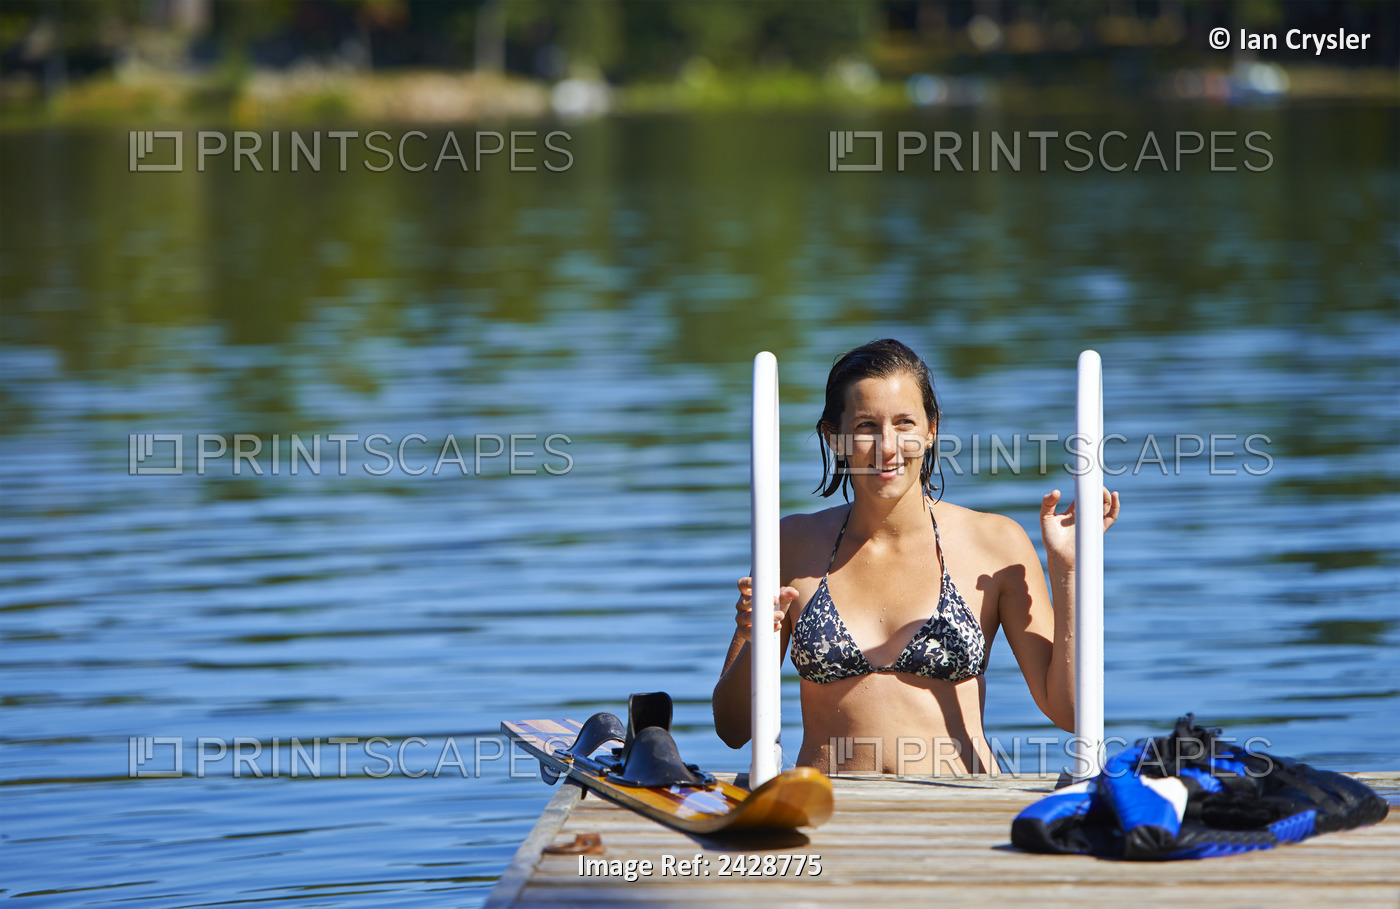 22-Year-Old Girl On Dock Ladder In Water With Water Ski; Ontario, Canada